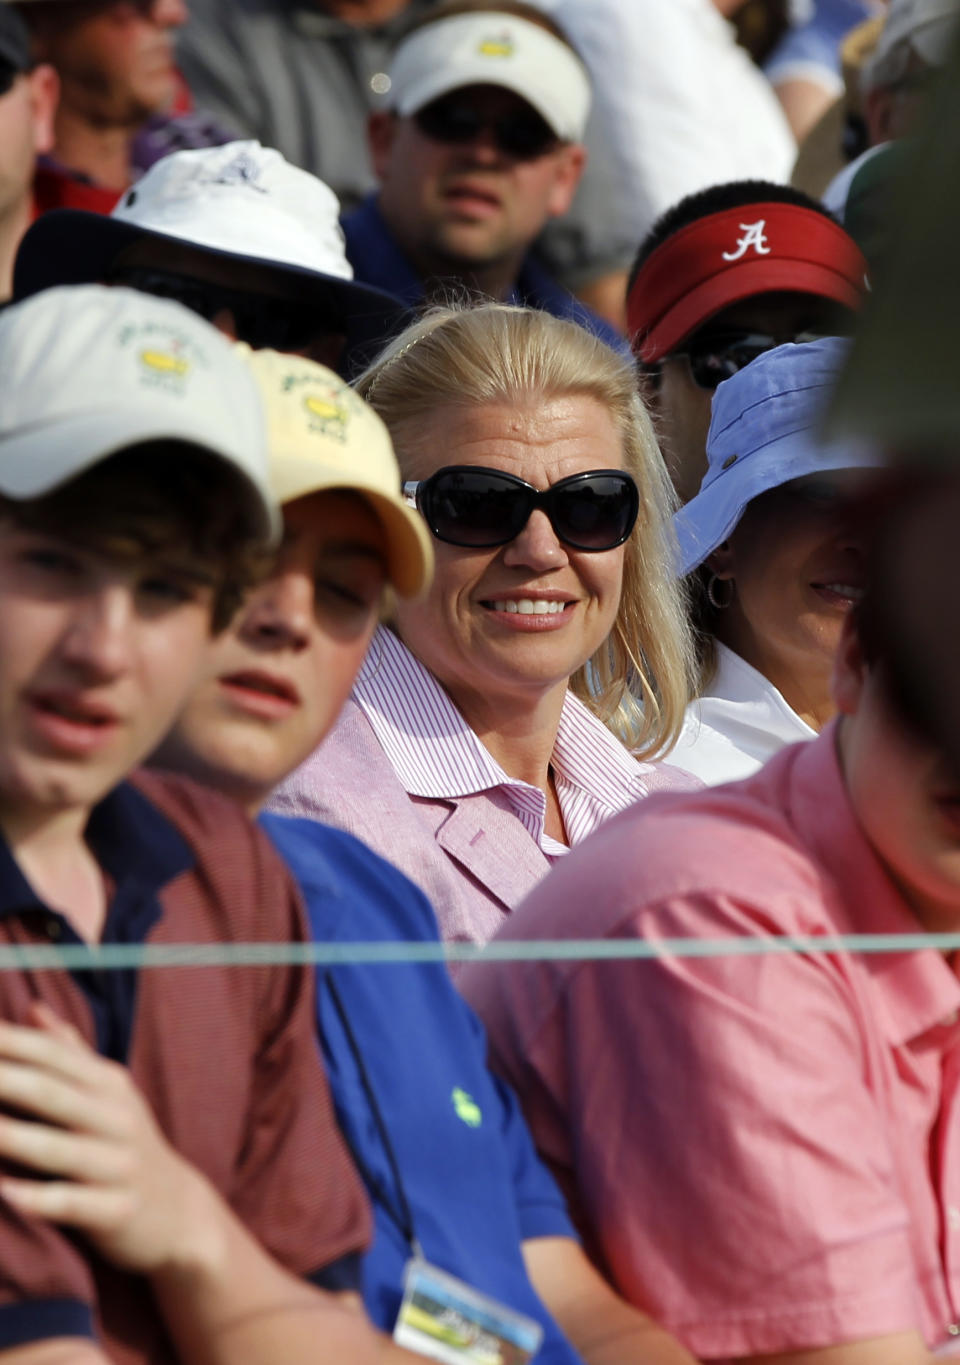 IBM CEO Virginia Rometty watches the fourth round of the Masters golf tournament from the gallery on the 18th green Sunday, April 8, 2012, in Augusta, Ga. (AP Photo/Chris O'Meara)